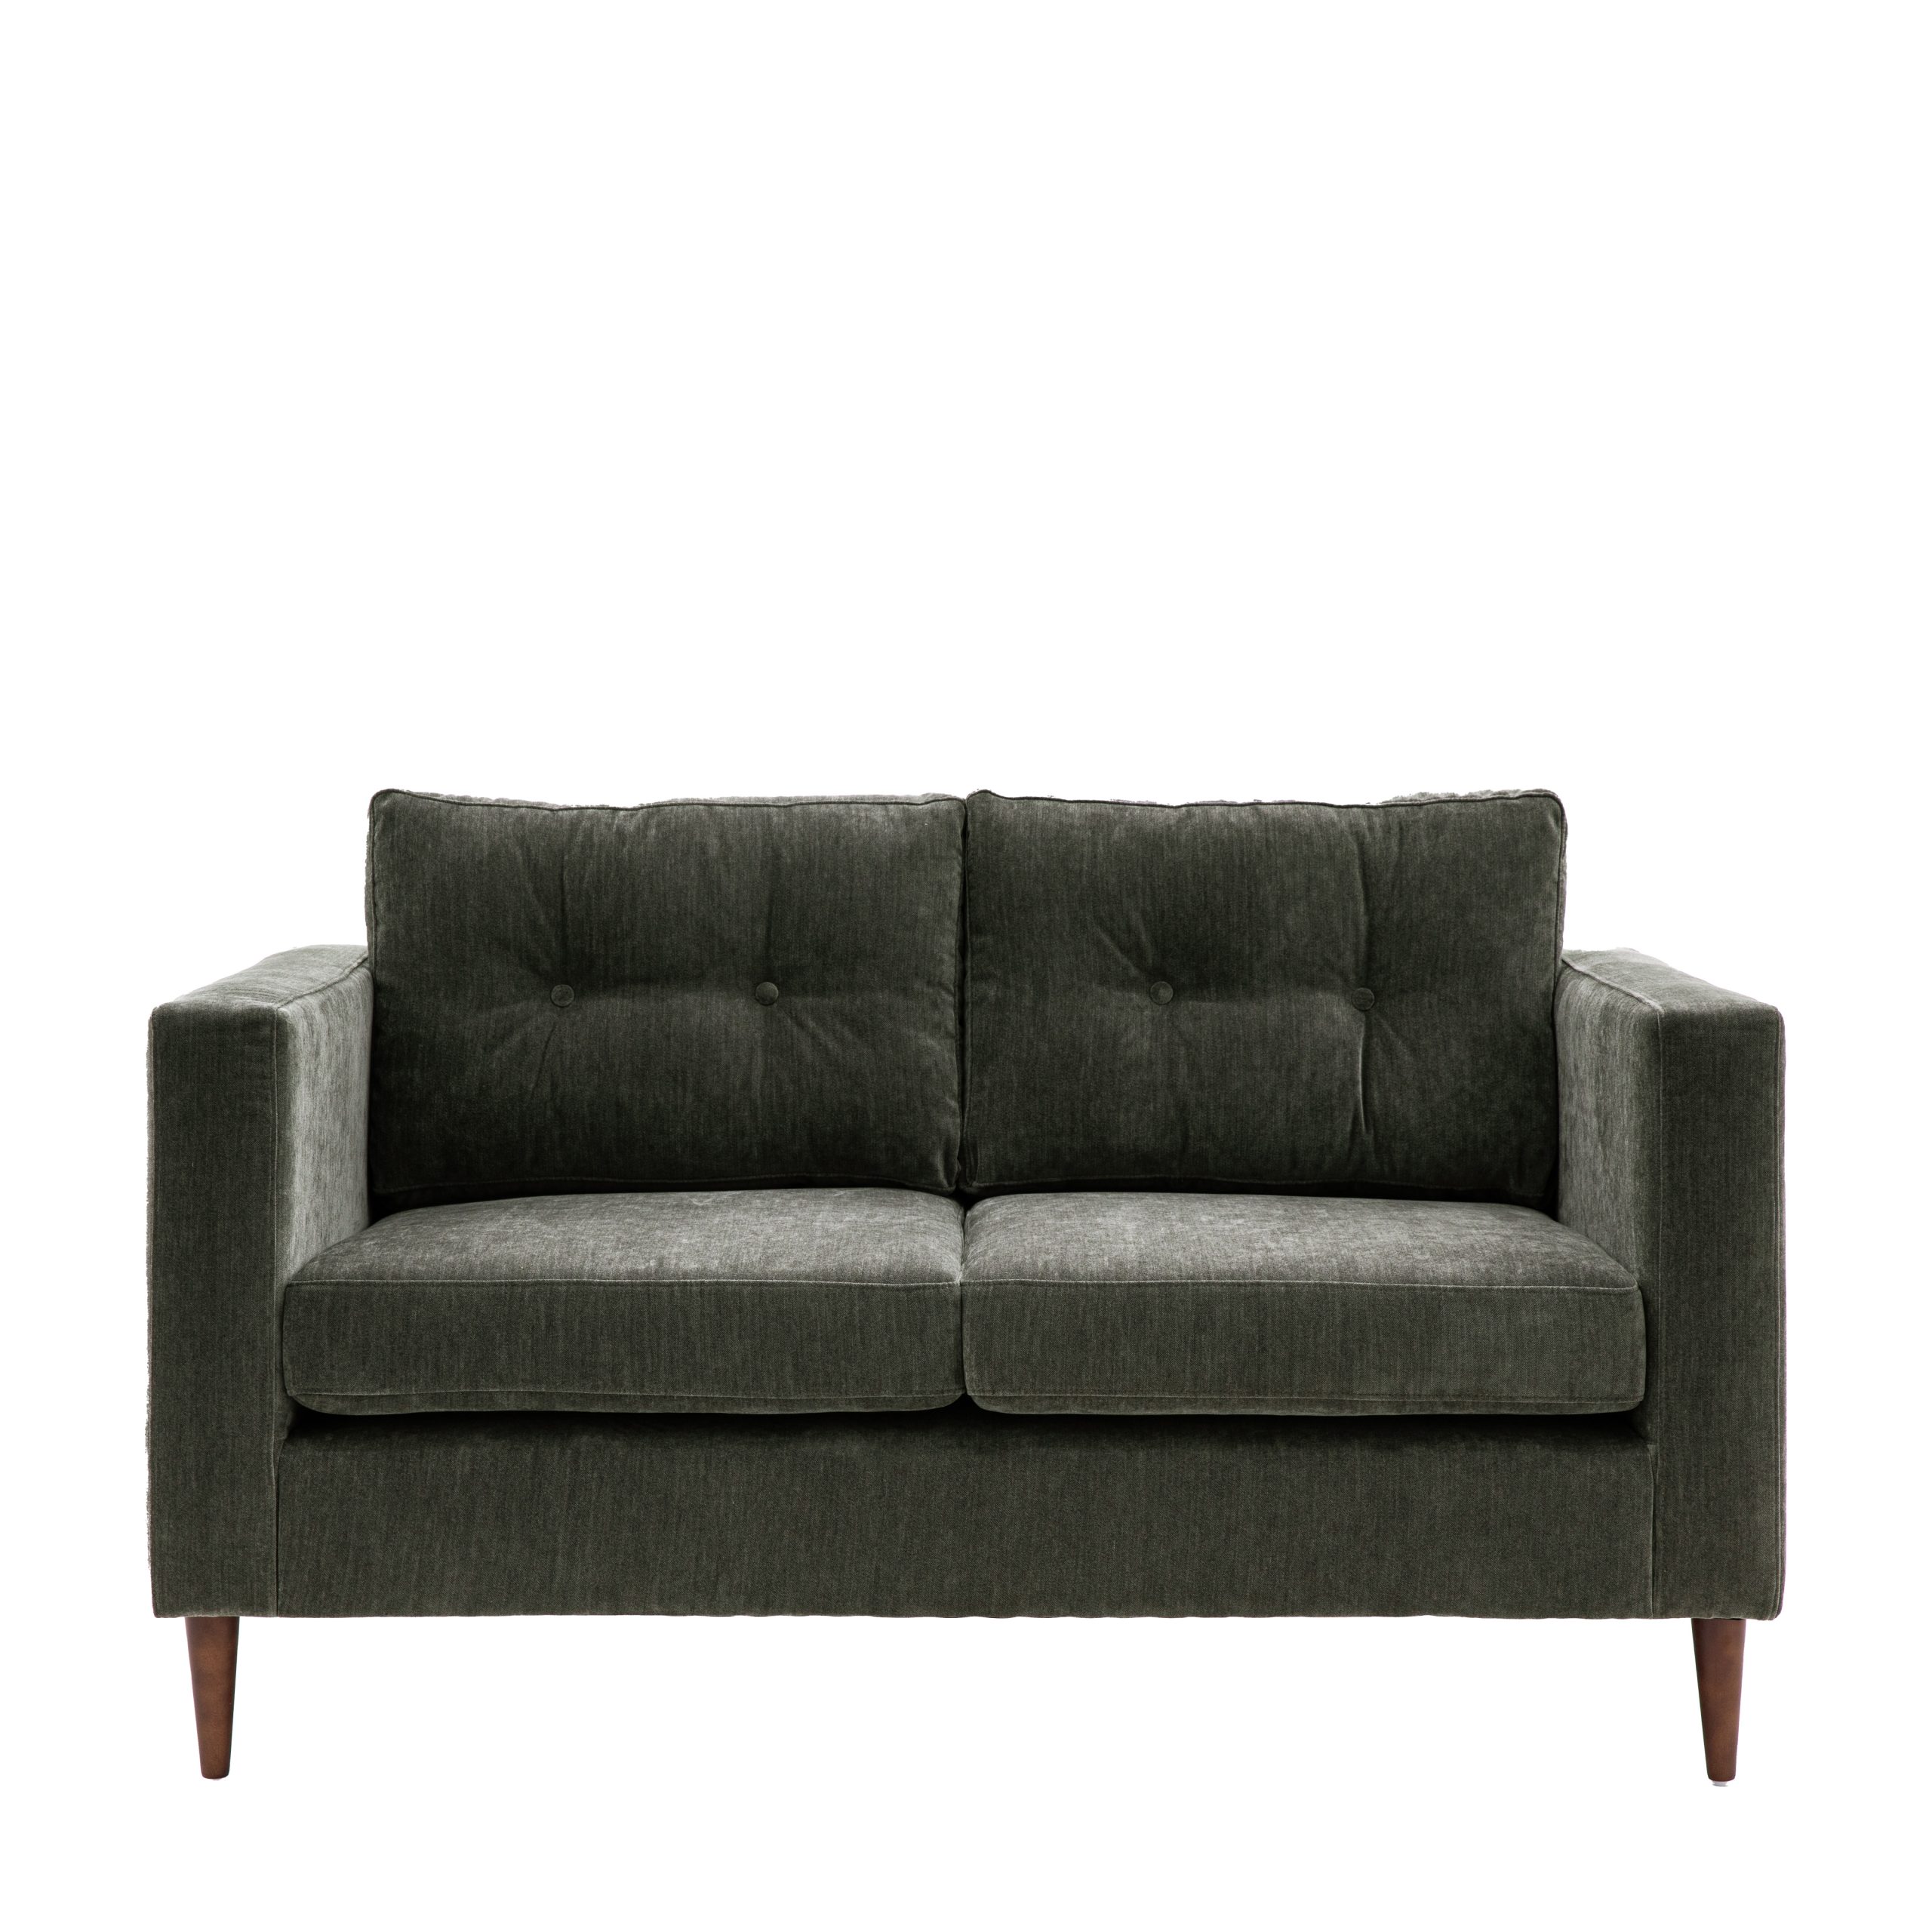 Gallery Direct Whitwell Sofa 2 Seater Forest